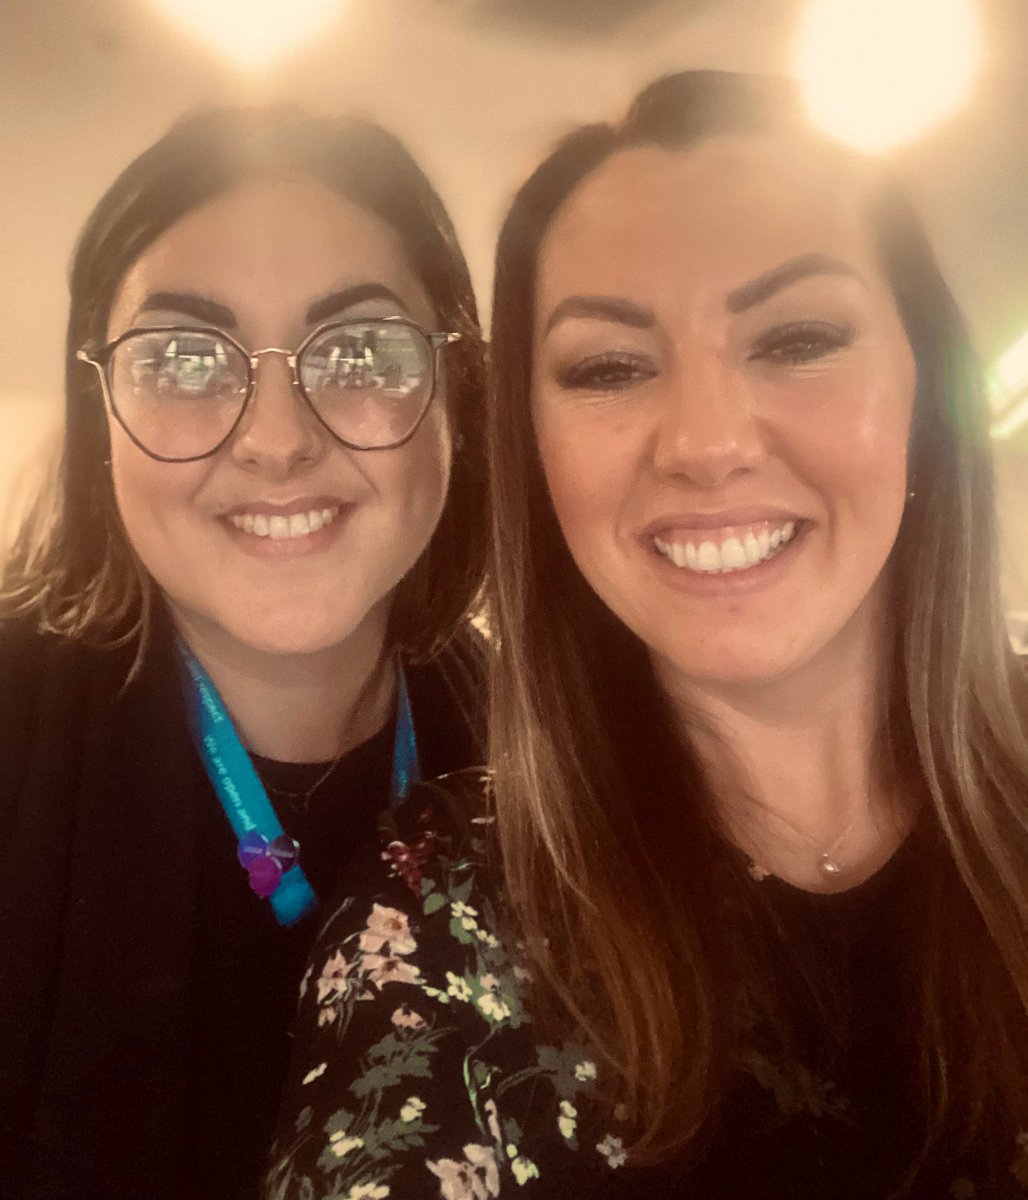 🌟 Fantastic day spent with @GMMH_NHS colleagues at their first #AdvancedPractice conference.
Inspirational speakers and all expertly facilitated by @taramcginley5 

Thanks so much for letting me be part of your day! 

Lovely to catch up with people in person too! 🙌🏽💙